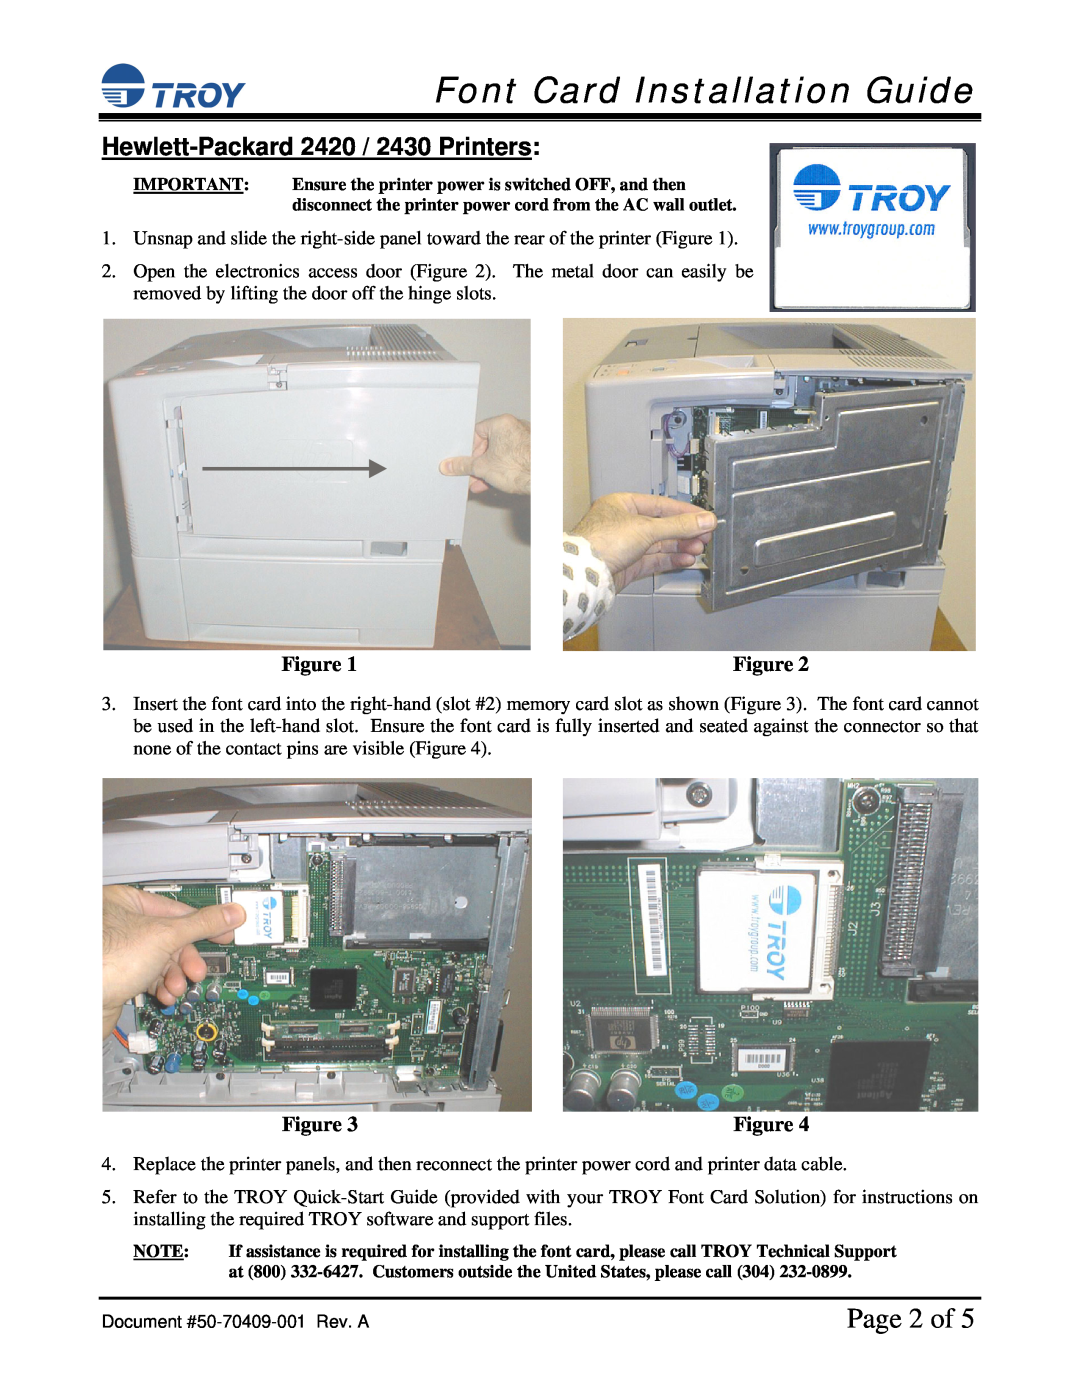 TROY Group HP 2420 / 2430, HP 9050 Page 2 of, Hewlett-Packard 2420 / 2430 Printers, Font Card Installation Guide 